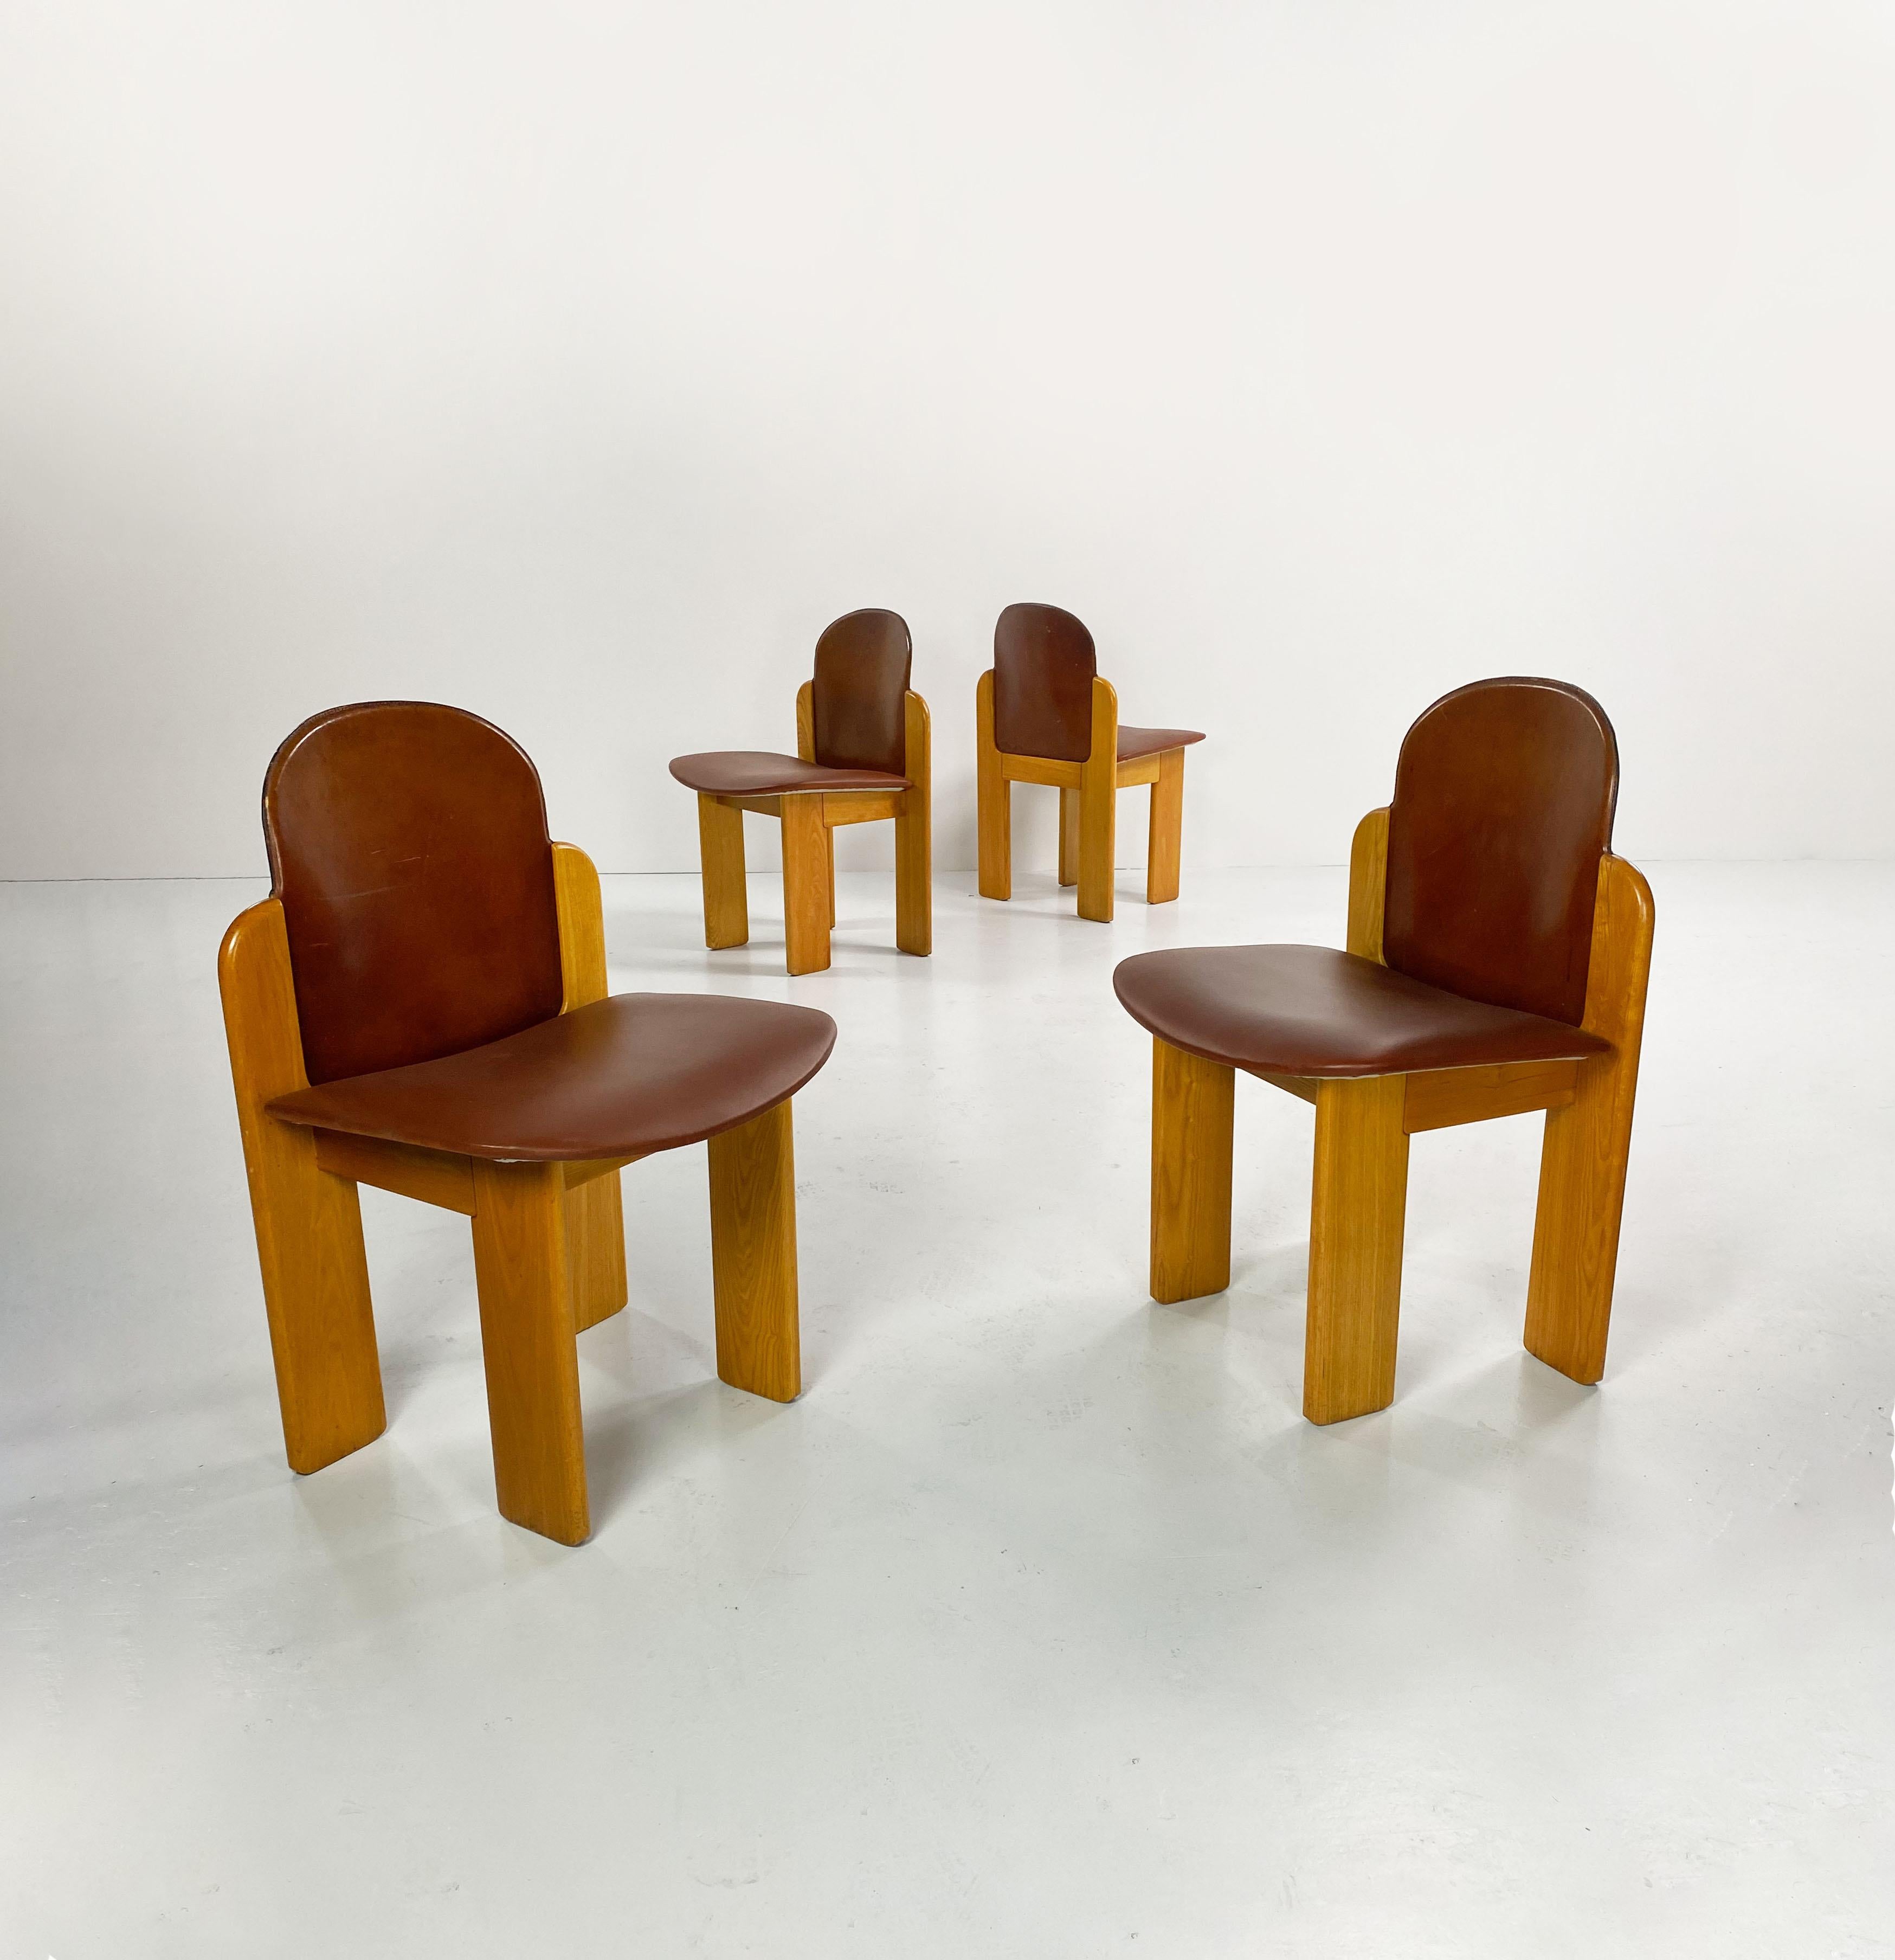 Set of 4 Model 330 cognac leather dining chairs designed by Italian architect and designer, Silvio Coppola and manufactured by Fratelli Montina in the 1970's.